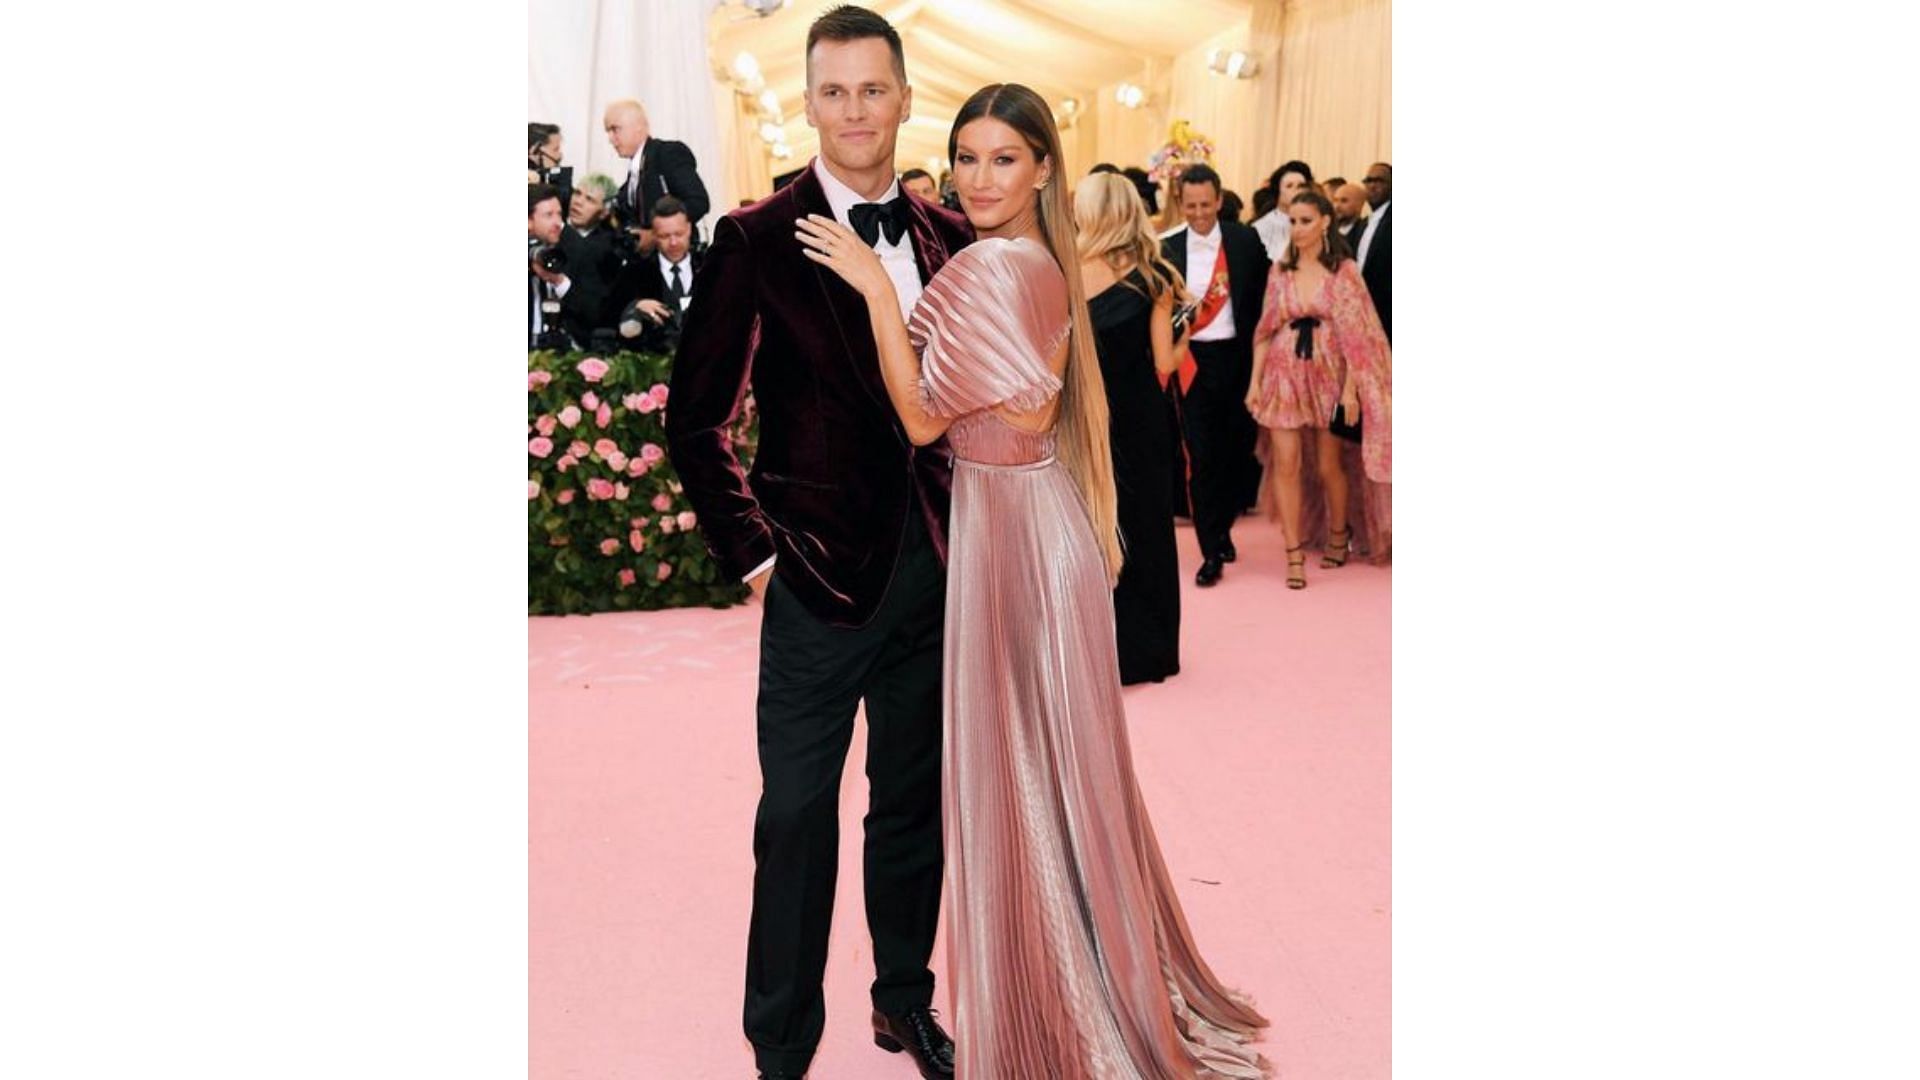 Tom Brady and Gisele at the Met Gala in 2019. (Image credit: @tombrady IG)